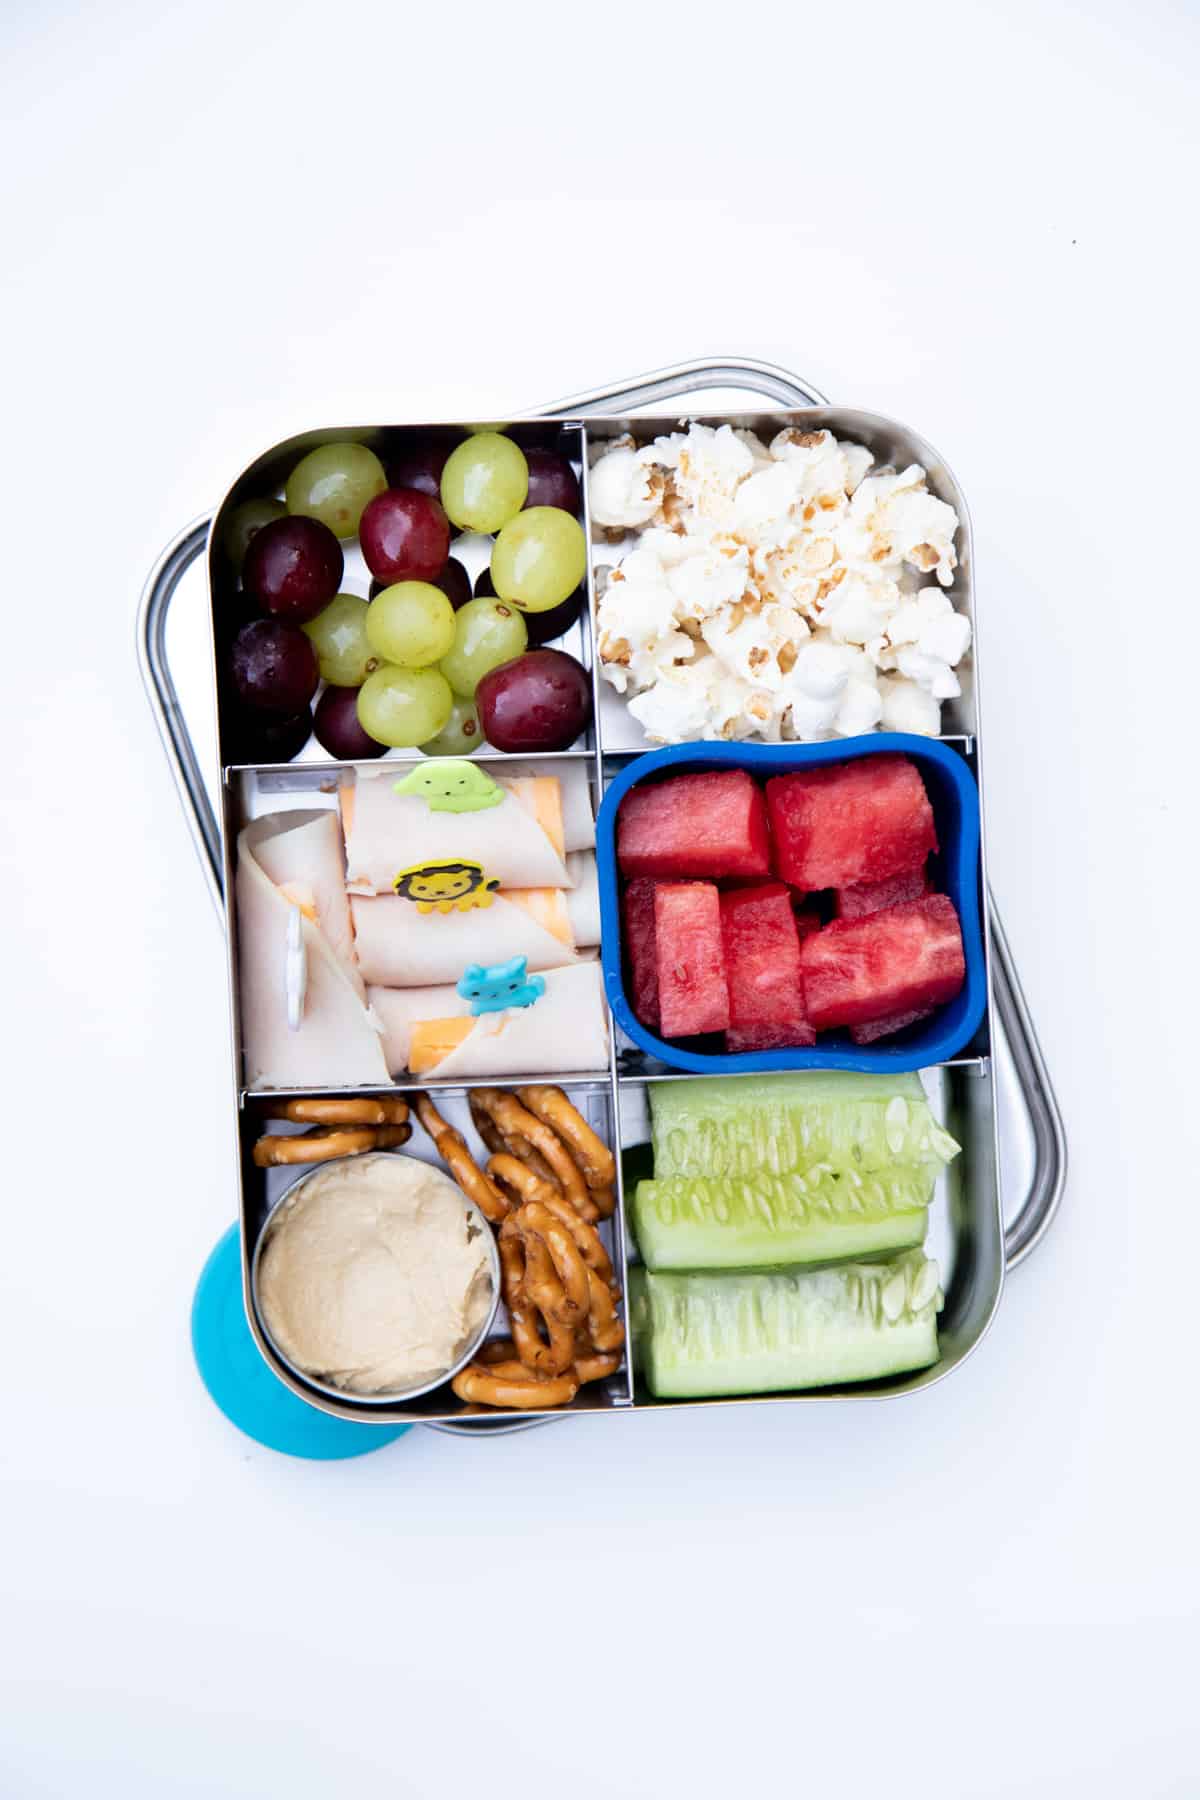 Stainless steel bento-style lunchbox filled with a snack lunch: pretzels and dip, grapes, watermelon, popcorn, cucumber spears, and deli meat roll-ups